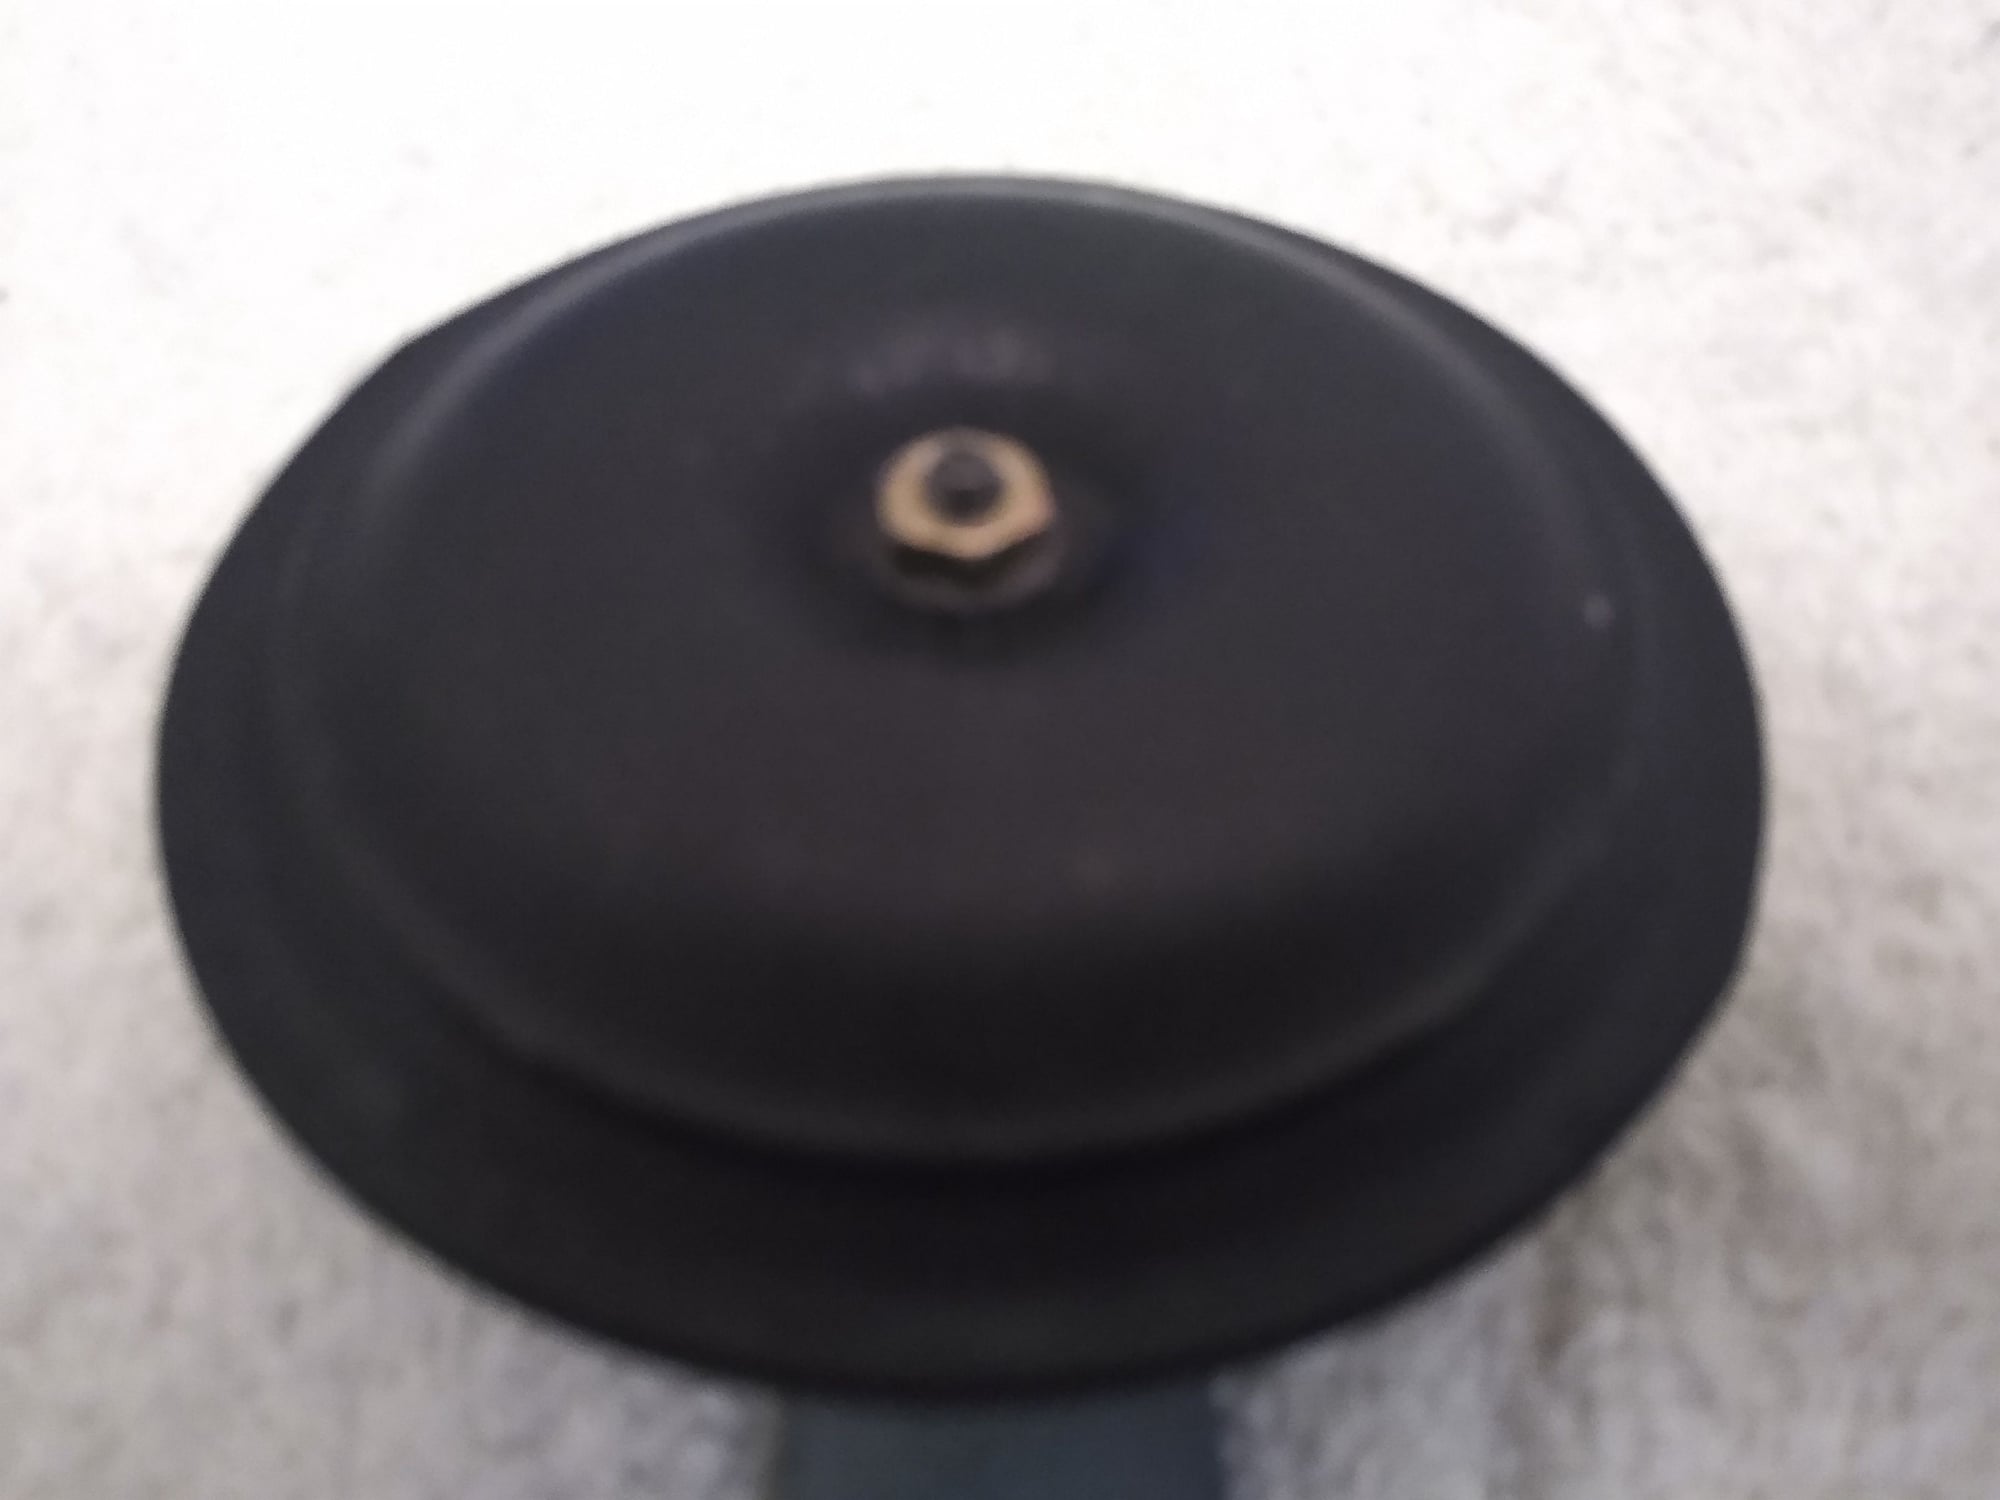 Miscellaneous - FD - OEM Horn - Used - 1993 to 1995 Mazda RX-7 - San Jose, CA 95121, United States